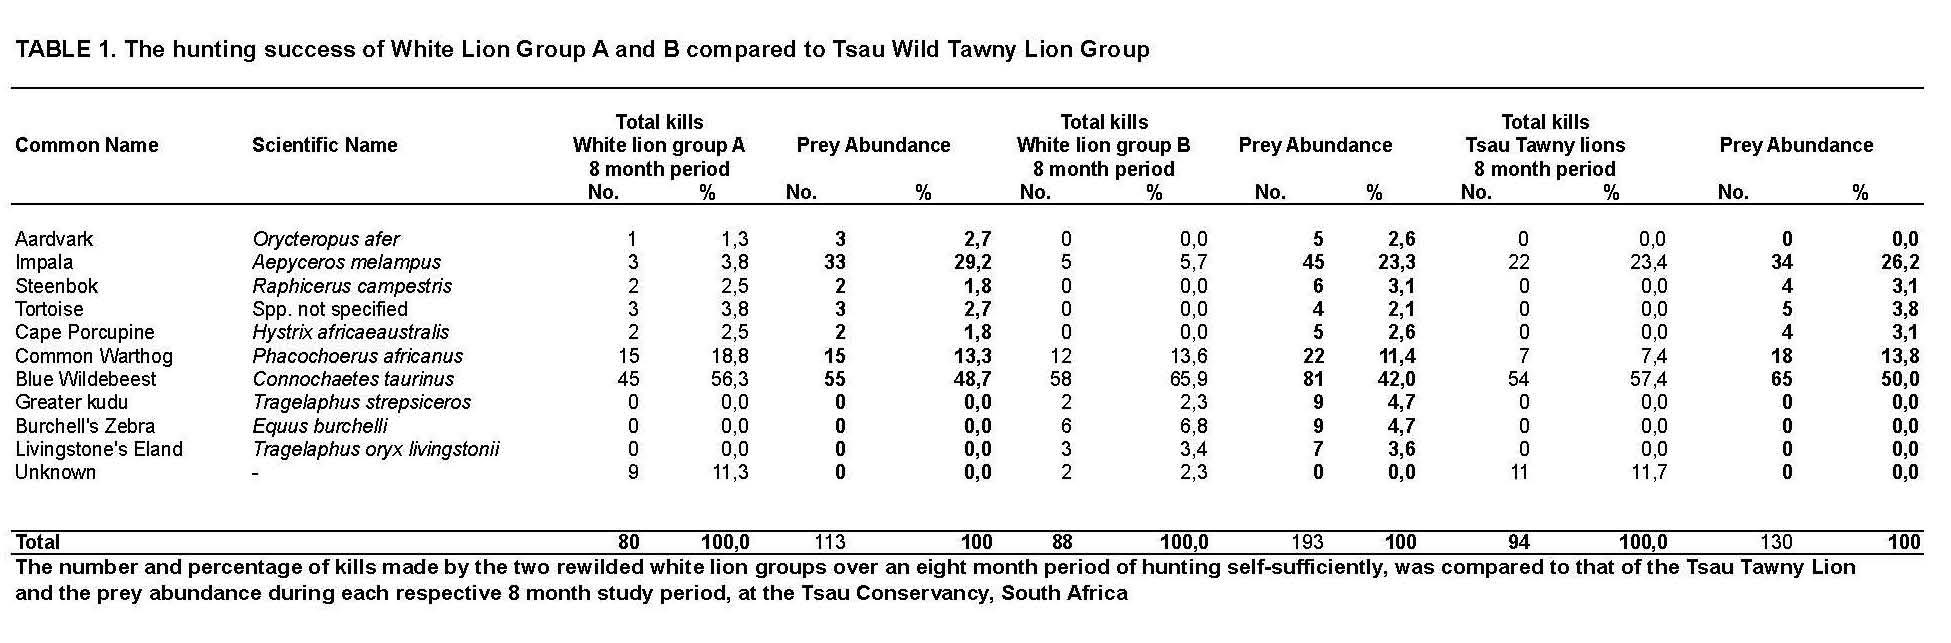 The hunting success of White Lion Group A and B compared to Tsau Wild Tawny Lion Group